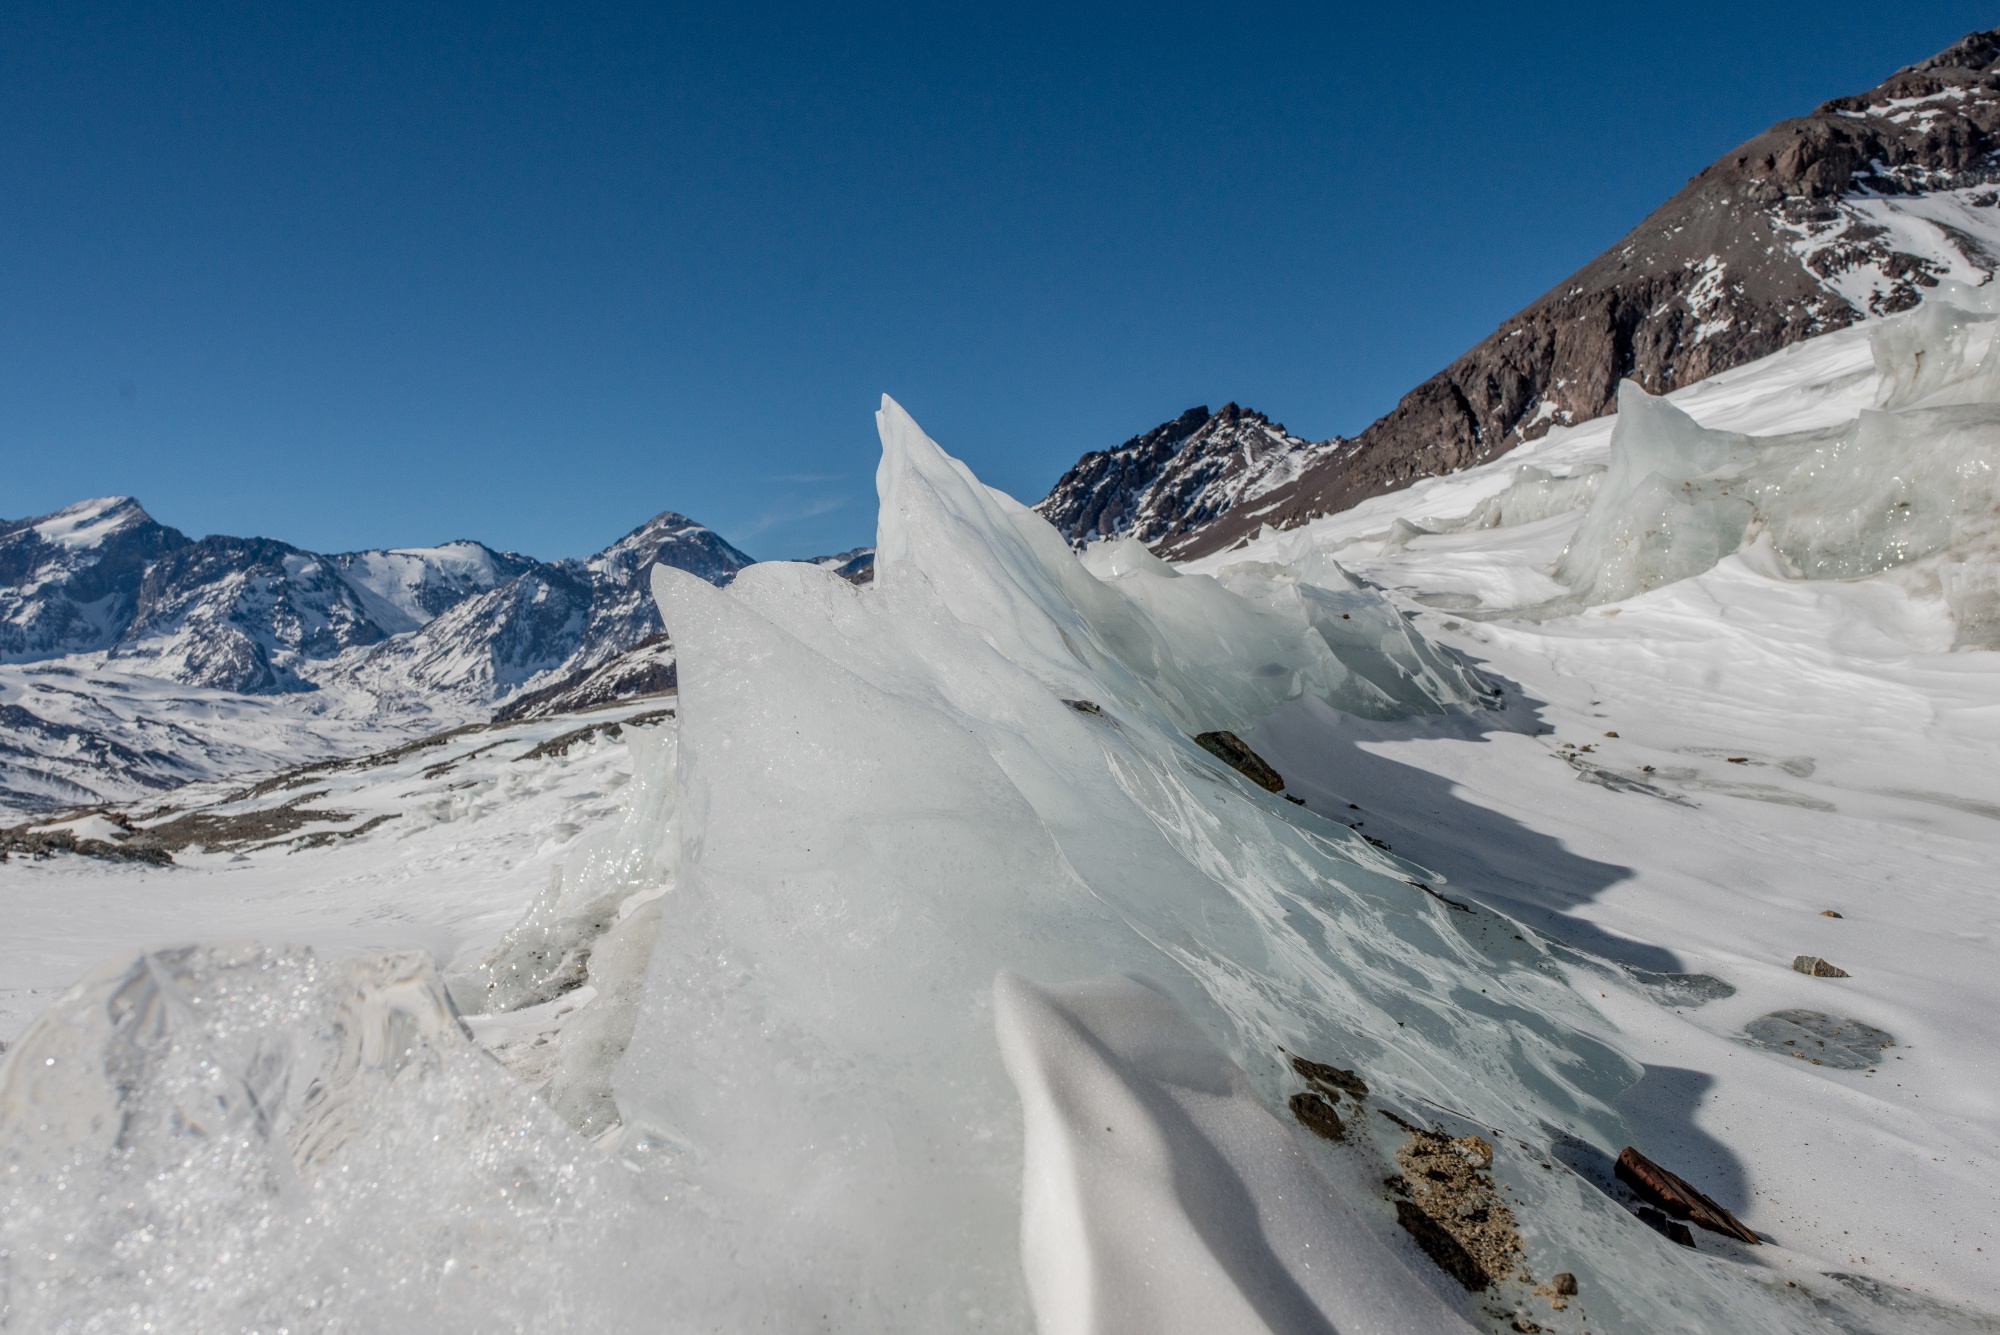 The Olivares Alfa glacier near Santiago, Chile, on&nbsp;July 5, 2019.&nbsp;Glaciers are among the natural features at risk from tipping points caused by climate change.